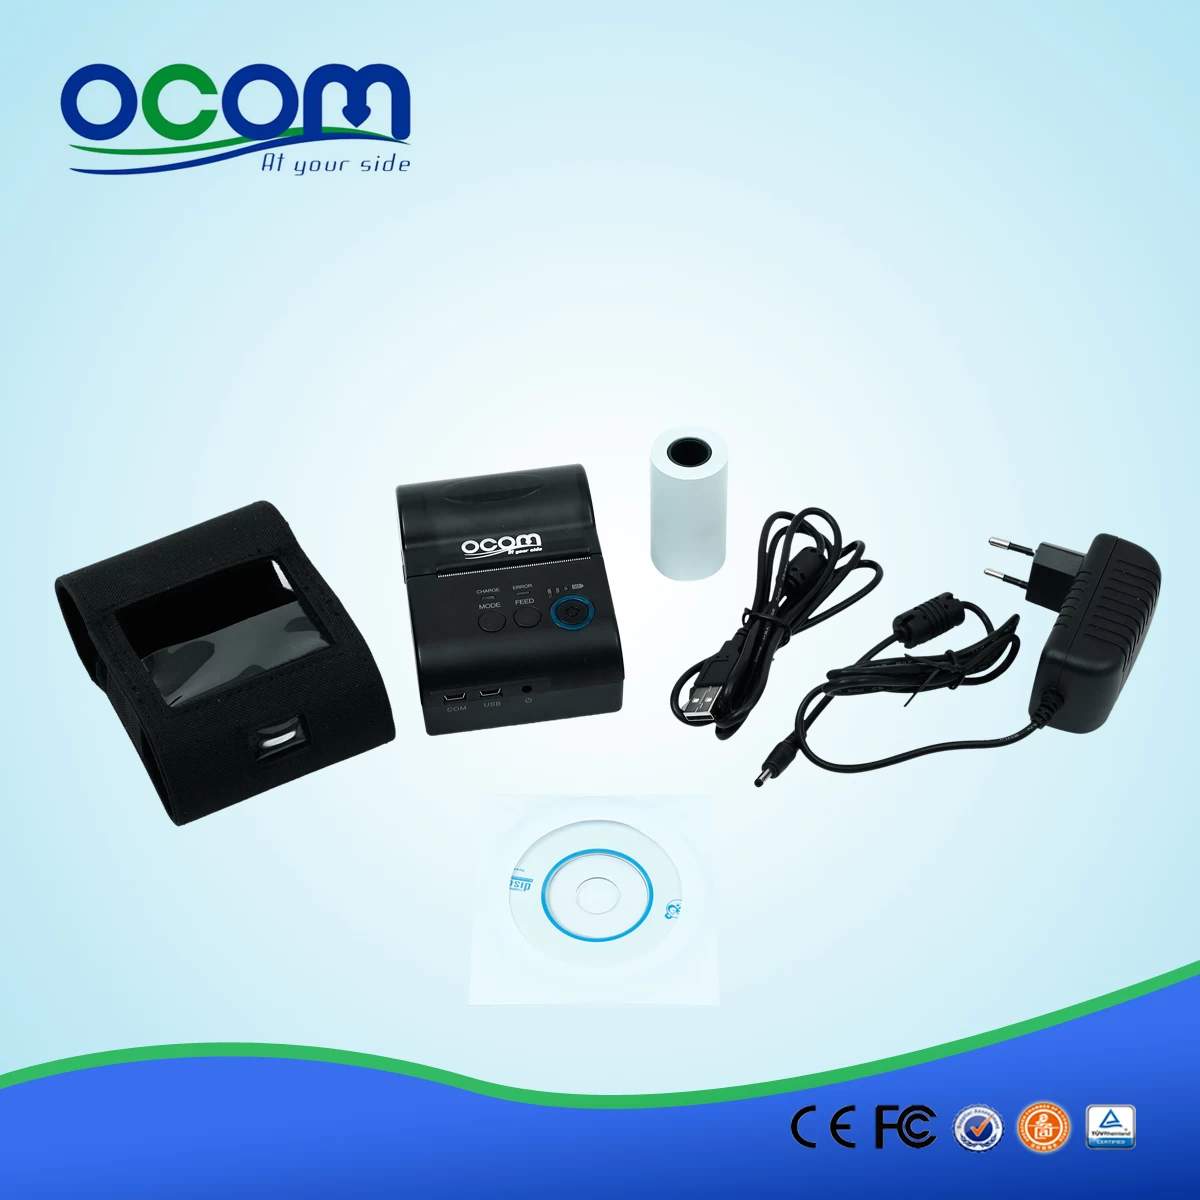 OCPP-M03 POS Receipt Thermal Bluetooth Android Printer with Higher print speed